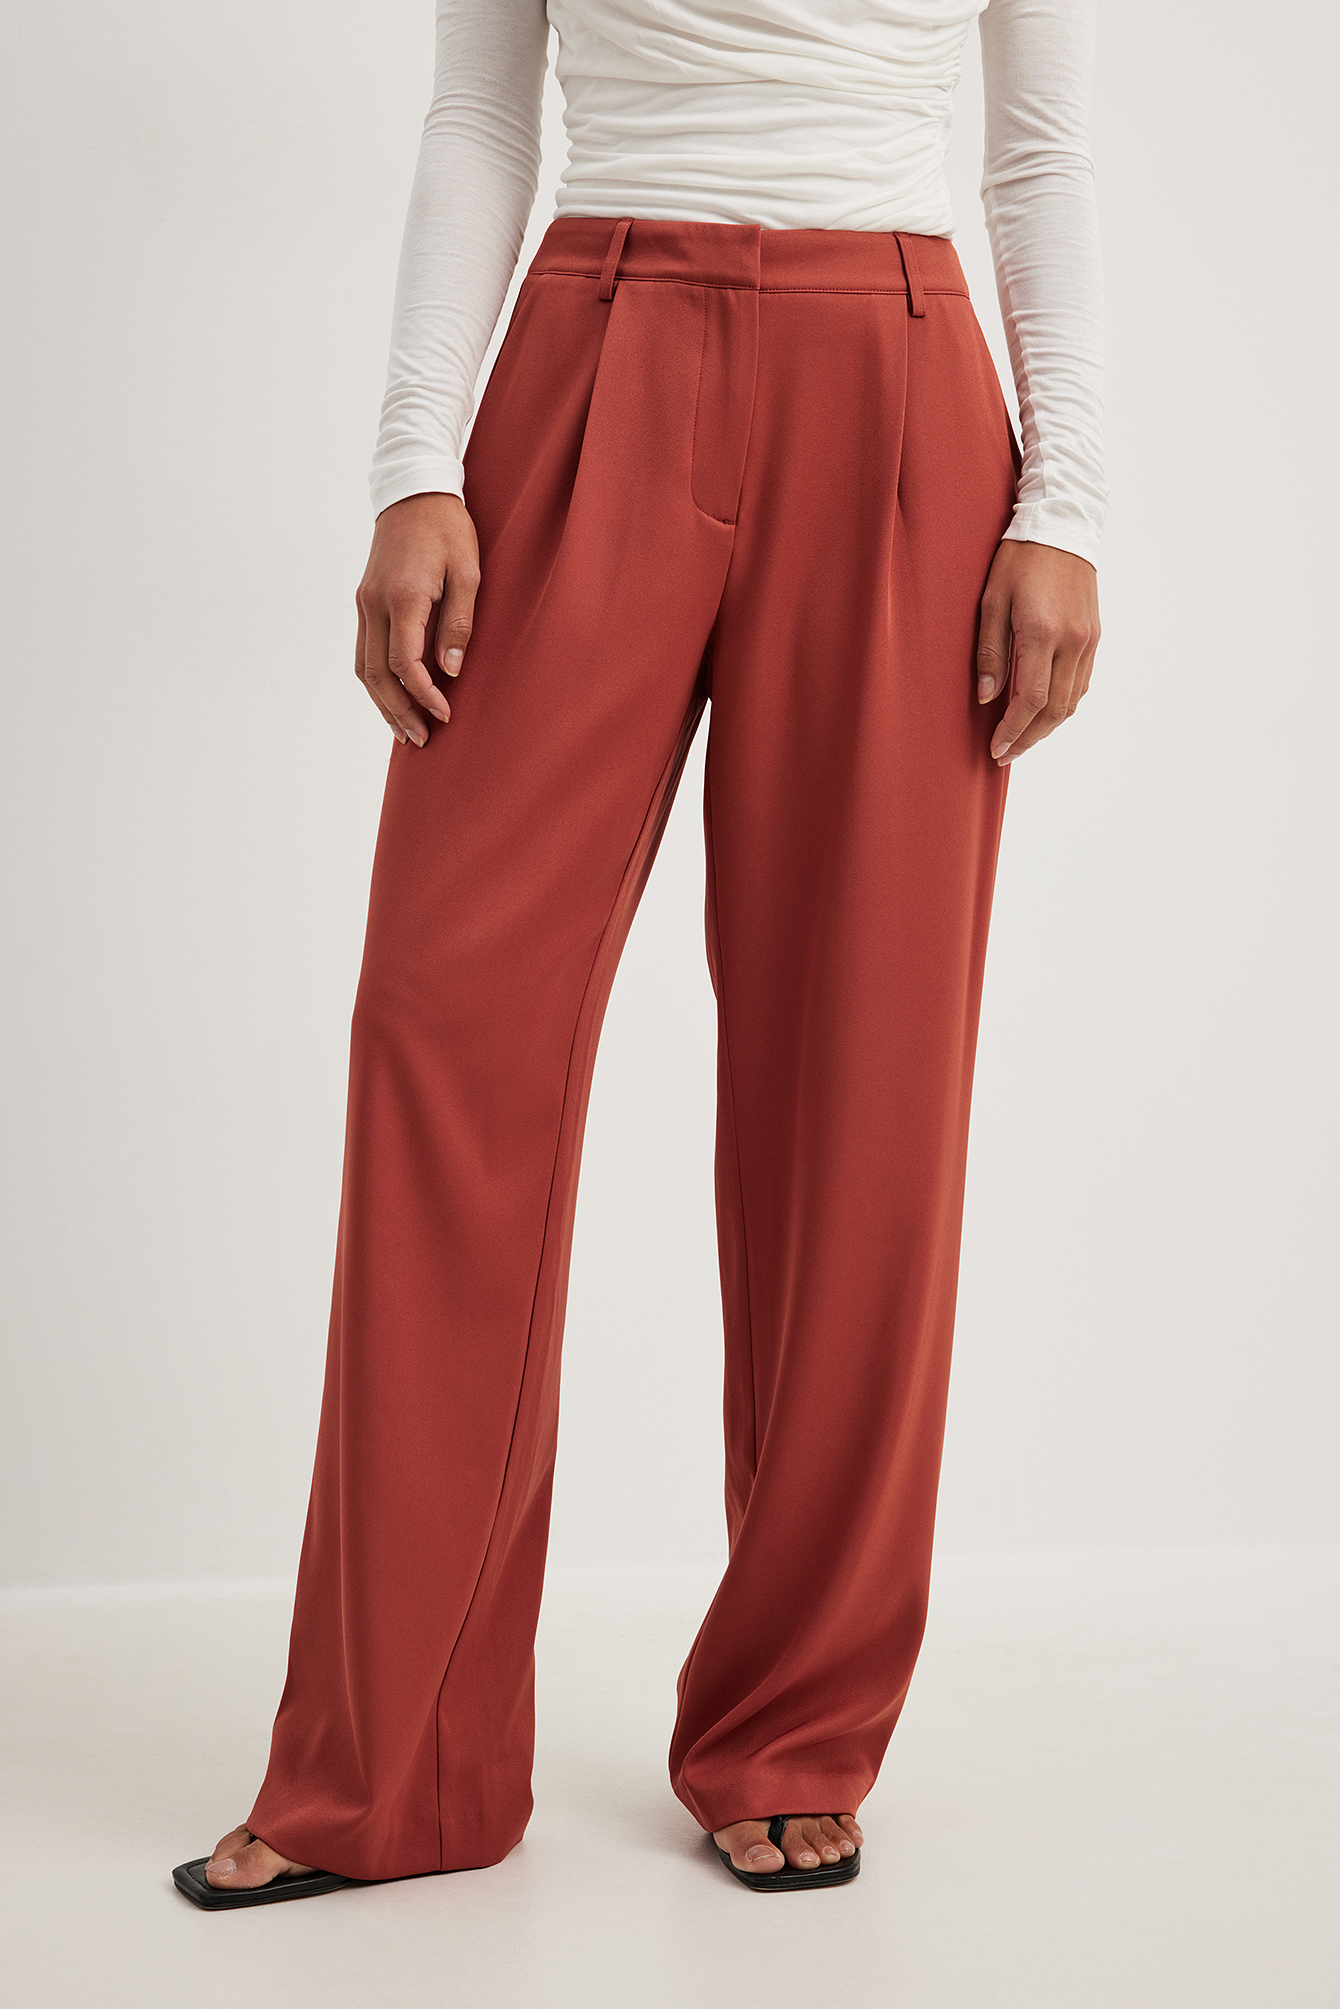 Women Red Trousers, Explore our New Arrivals